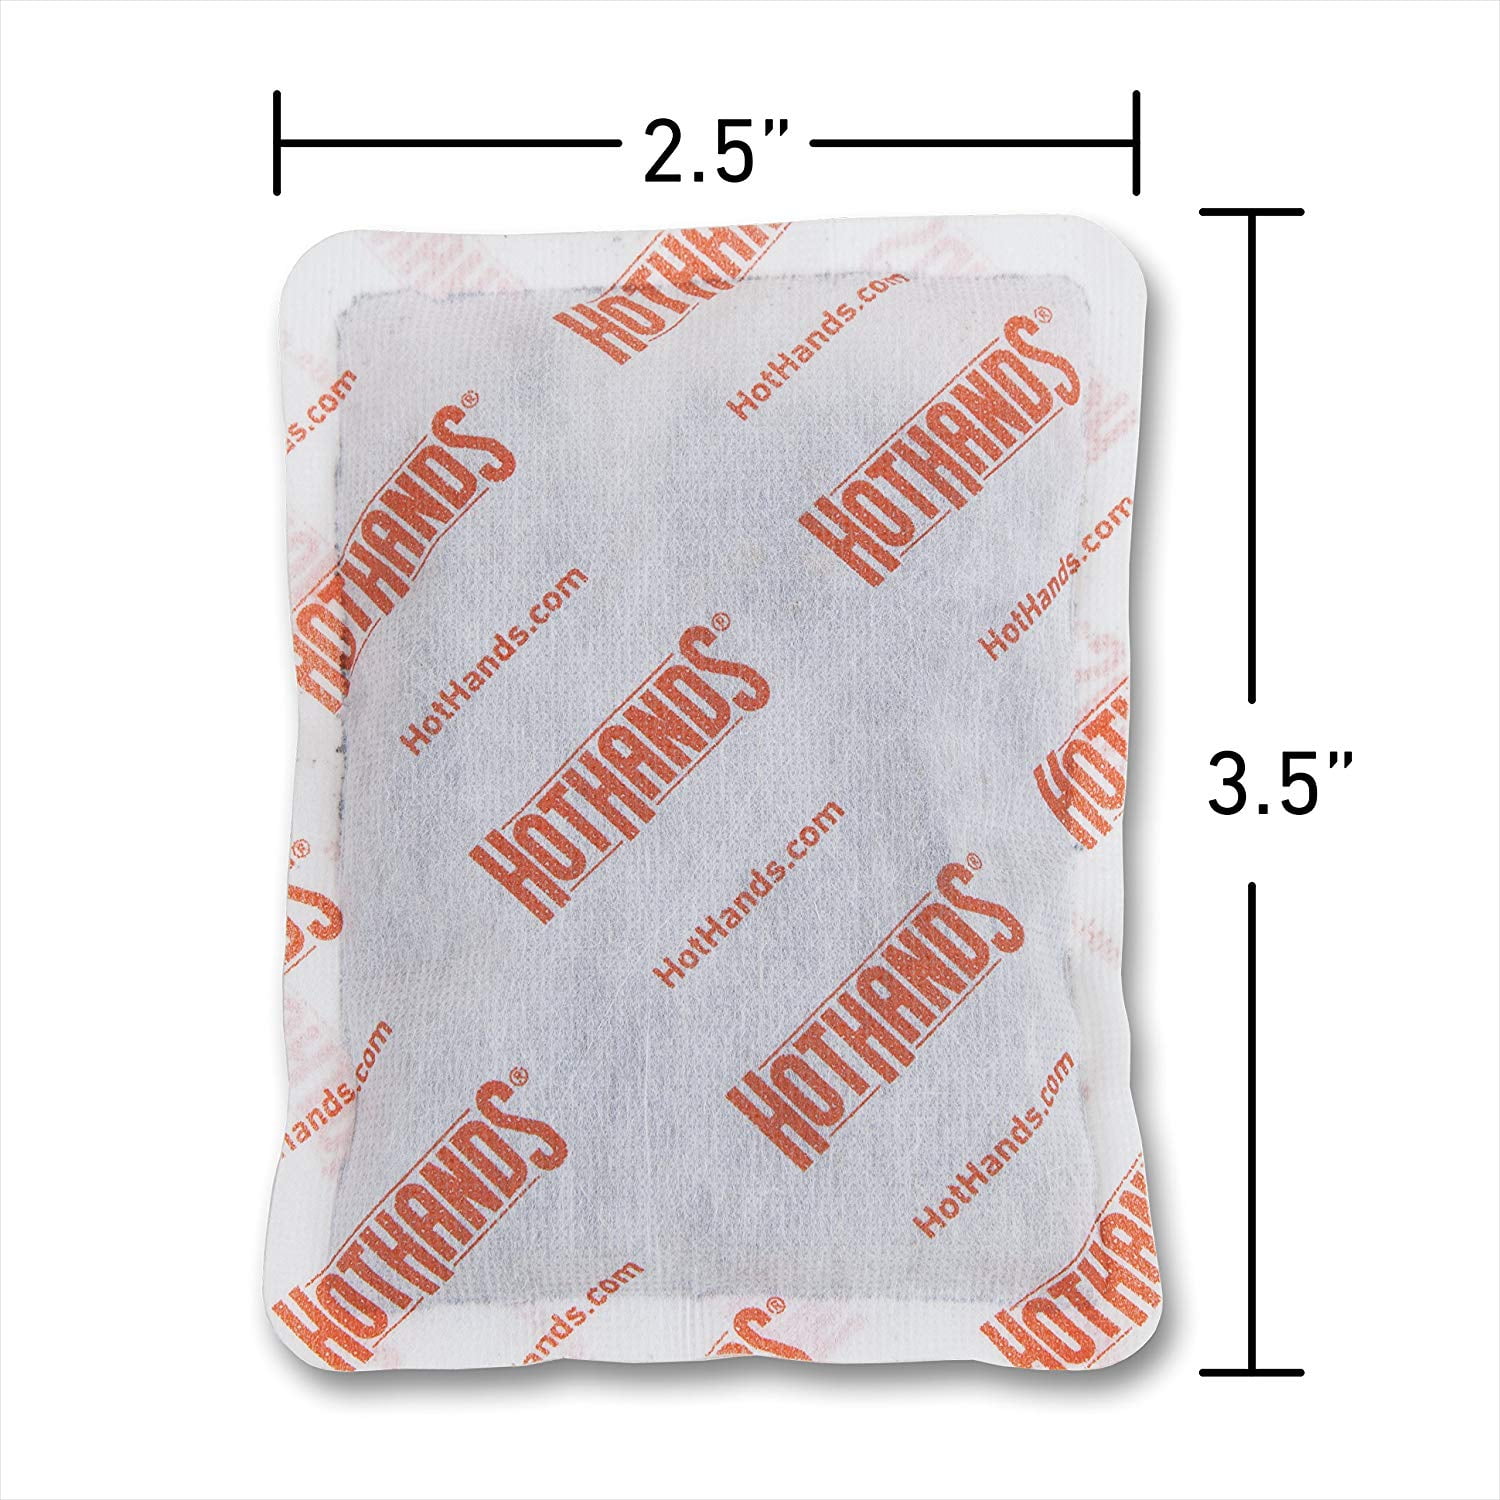 Details about   HotHands Hand Body Warmers 18 Hour Heat Pack Air Activated Super Warmer 80 Count 